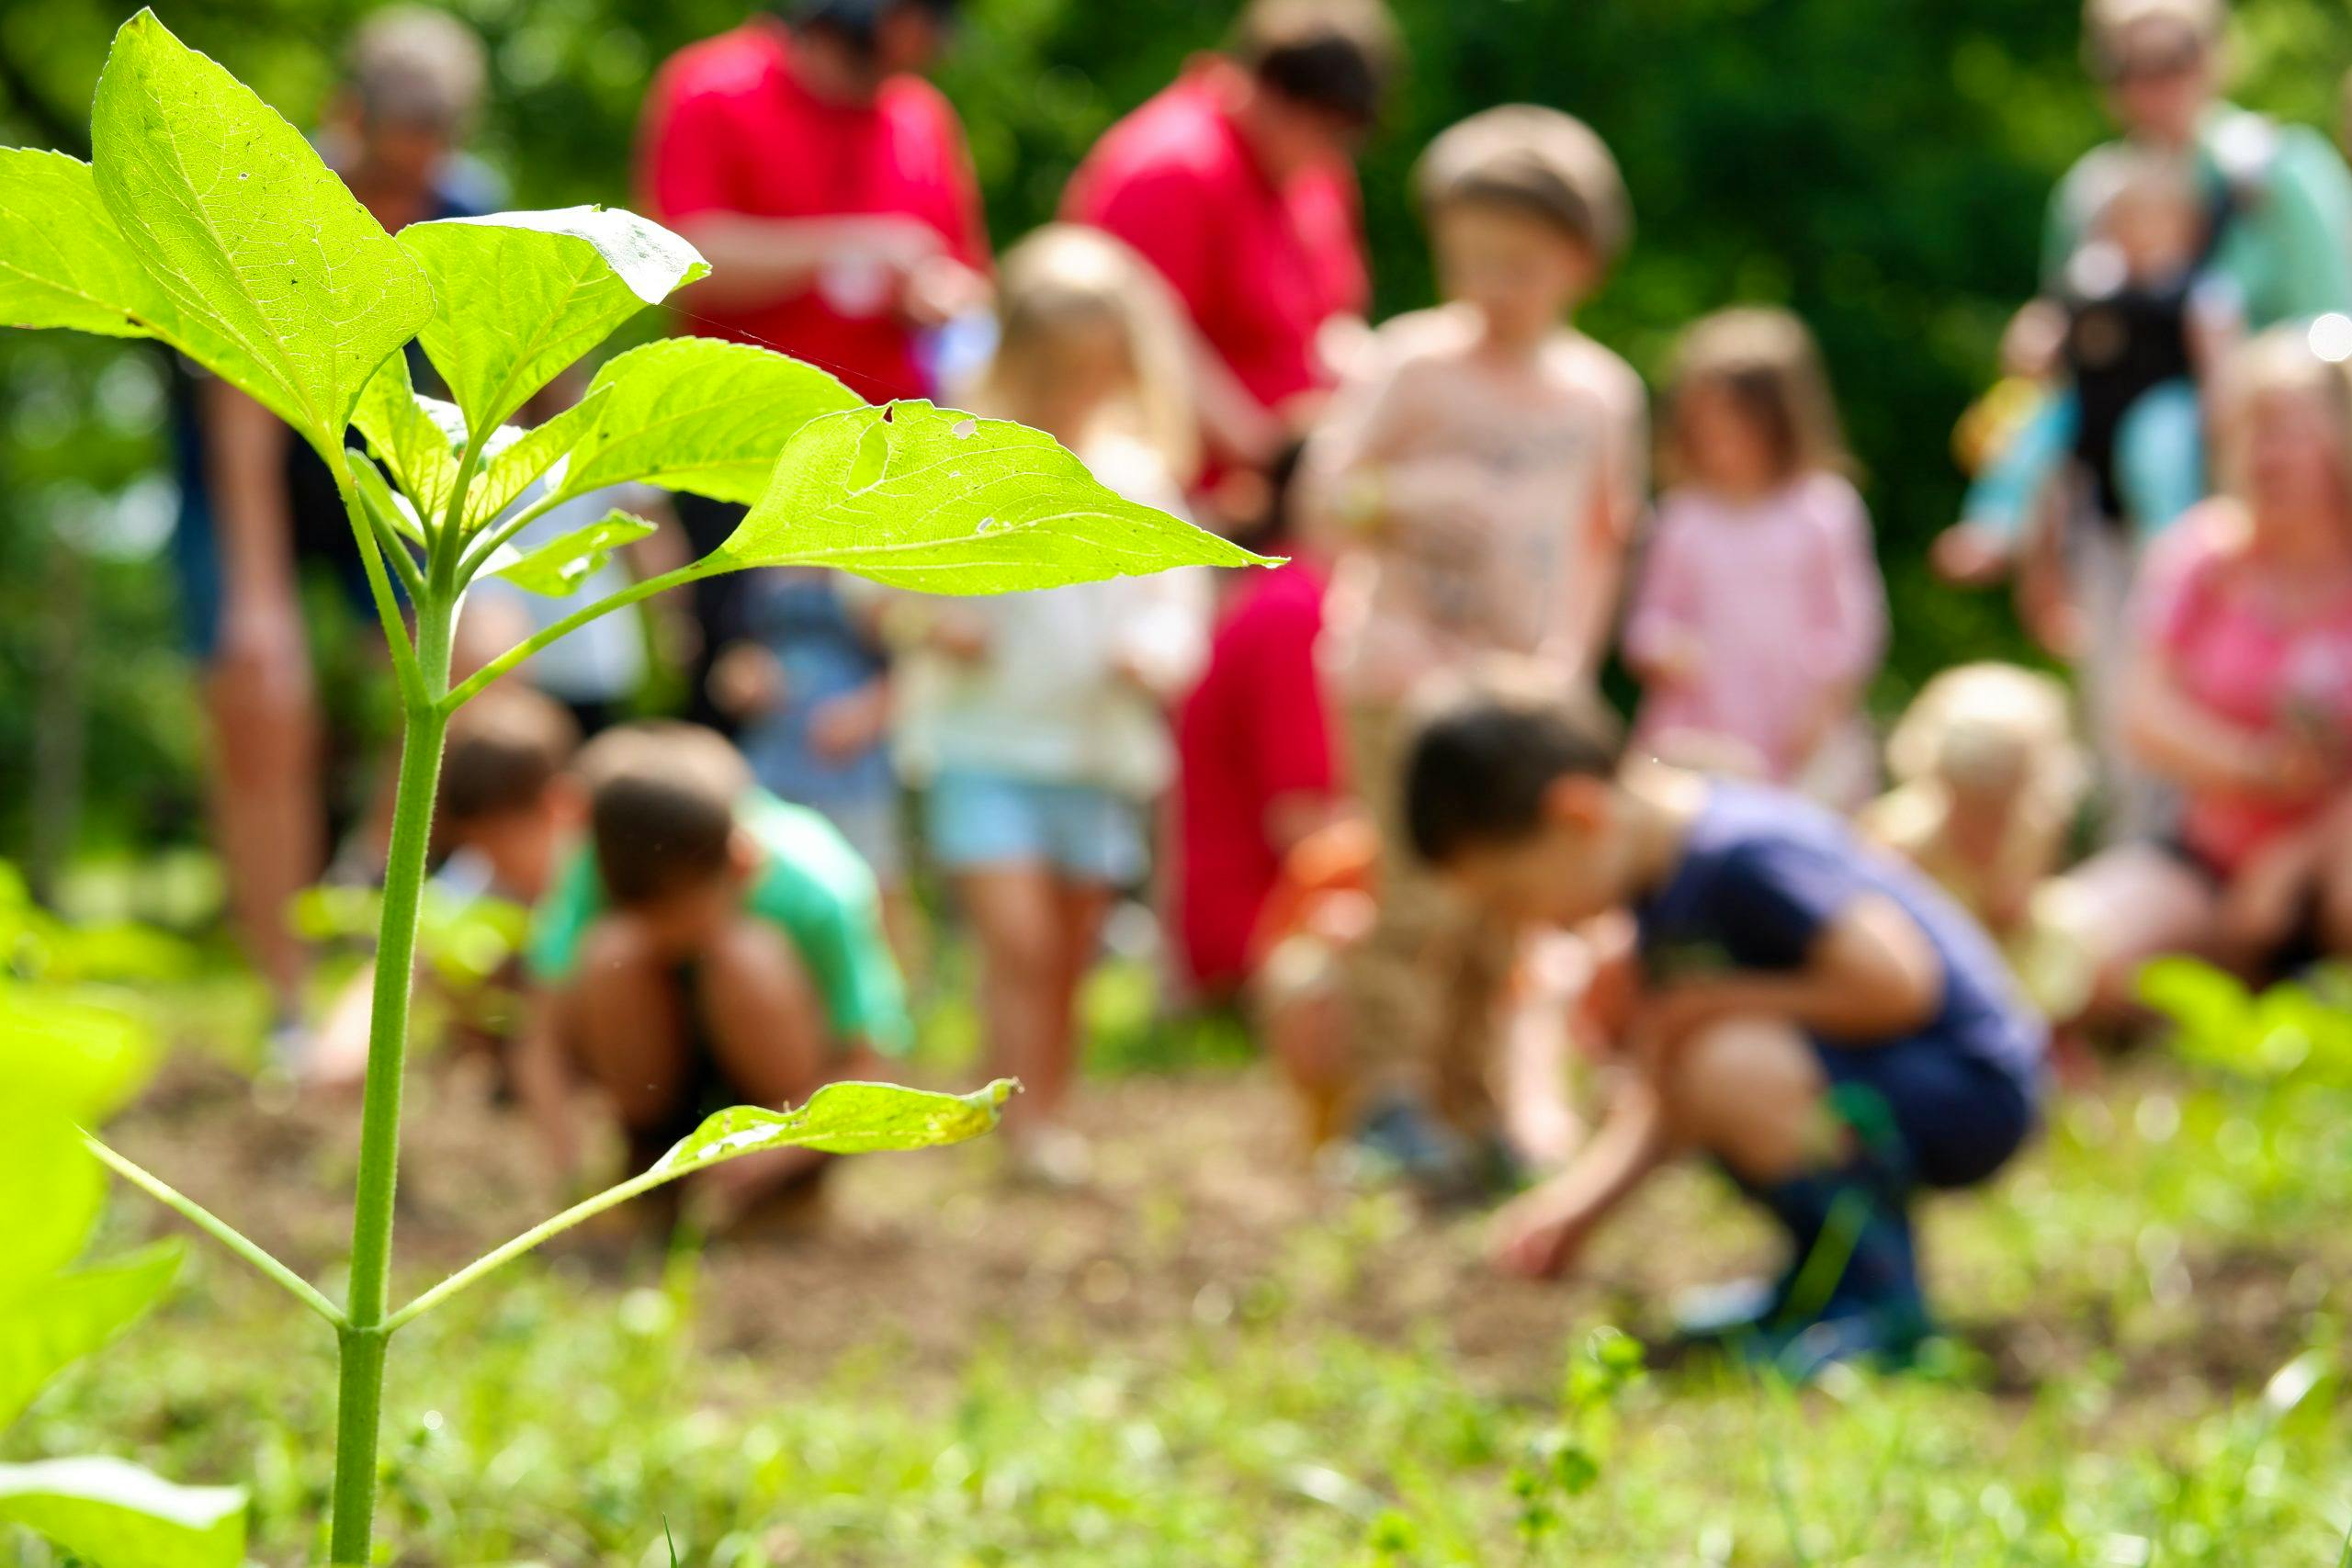 The photograph was taken outside. A leaf is in the foreground. A group of children taking part in the Little Explorers preschool program are in the background. Some are kneeling and planting seeds in the soil. A few other children are standing behind them and watching them as they work.